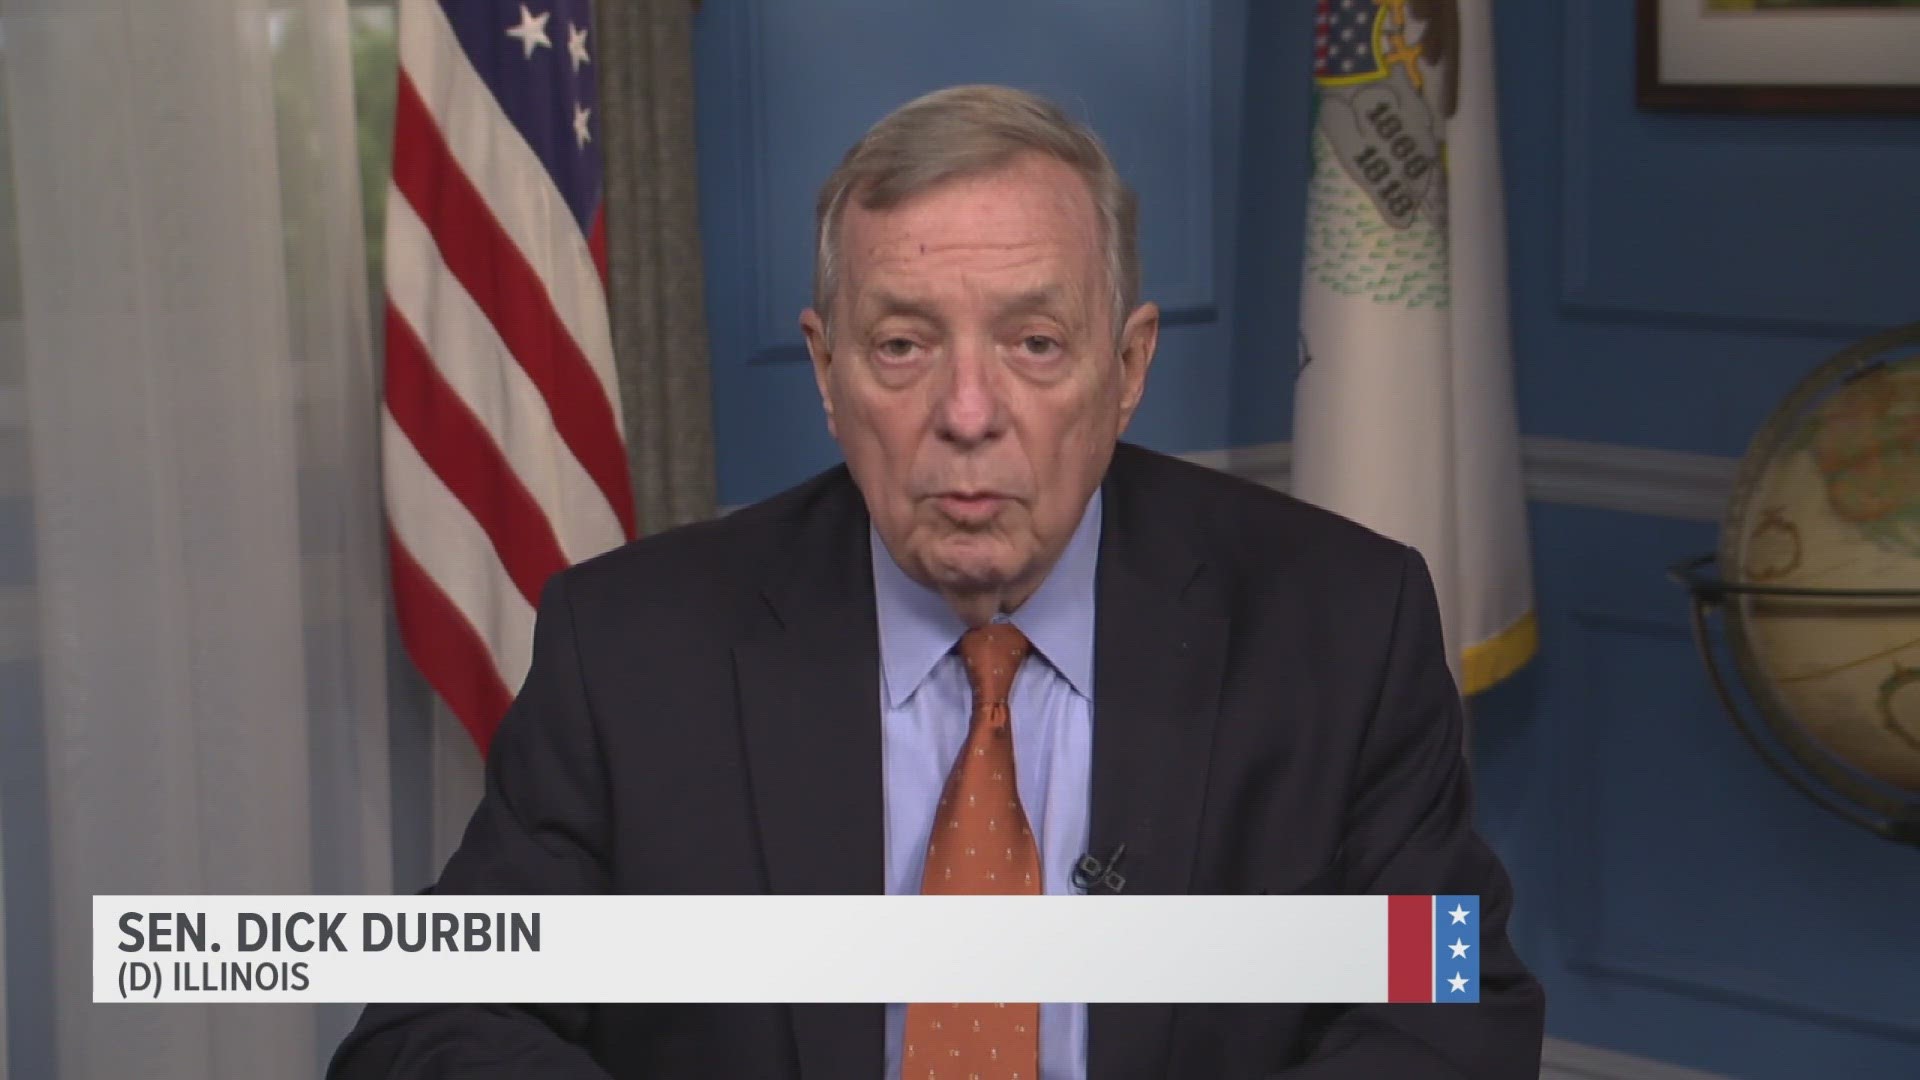 Discussing the Israel-Hamas conflict, Senate Majority Whip Dick Durbin said there is "pretty clear evidence that there's a need for new leadership" in Israel.